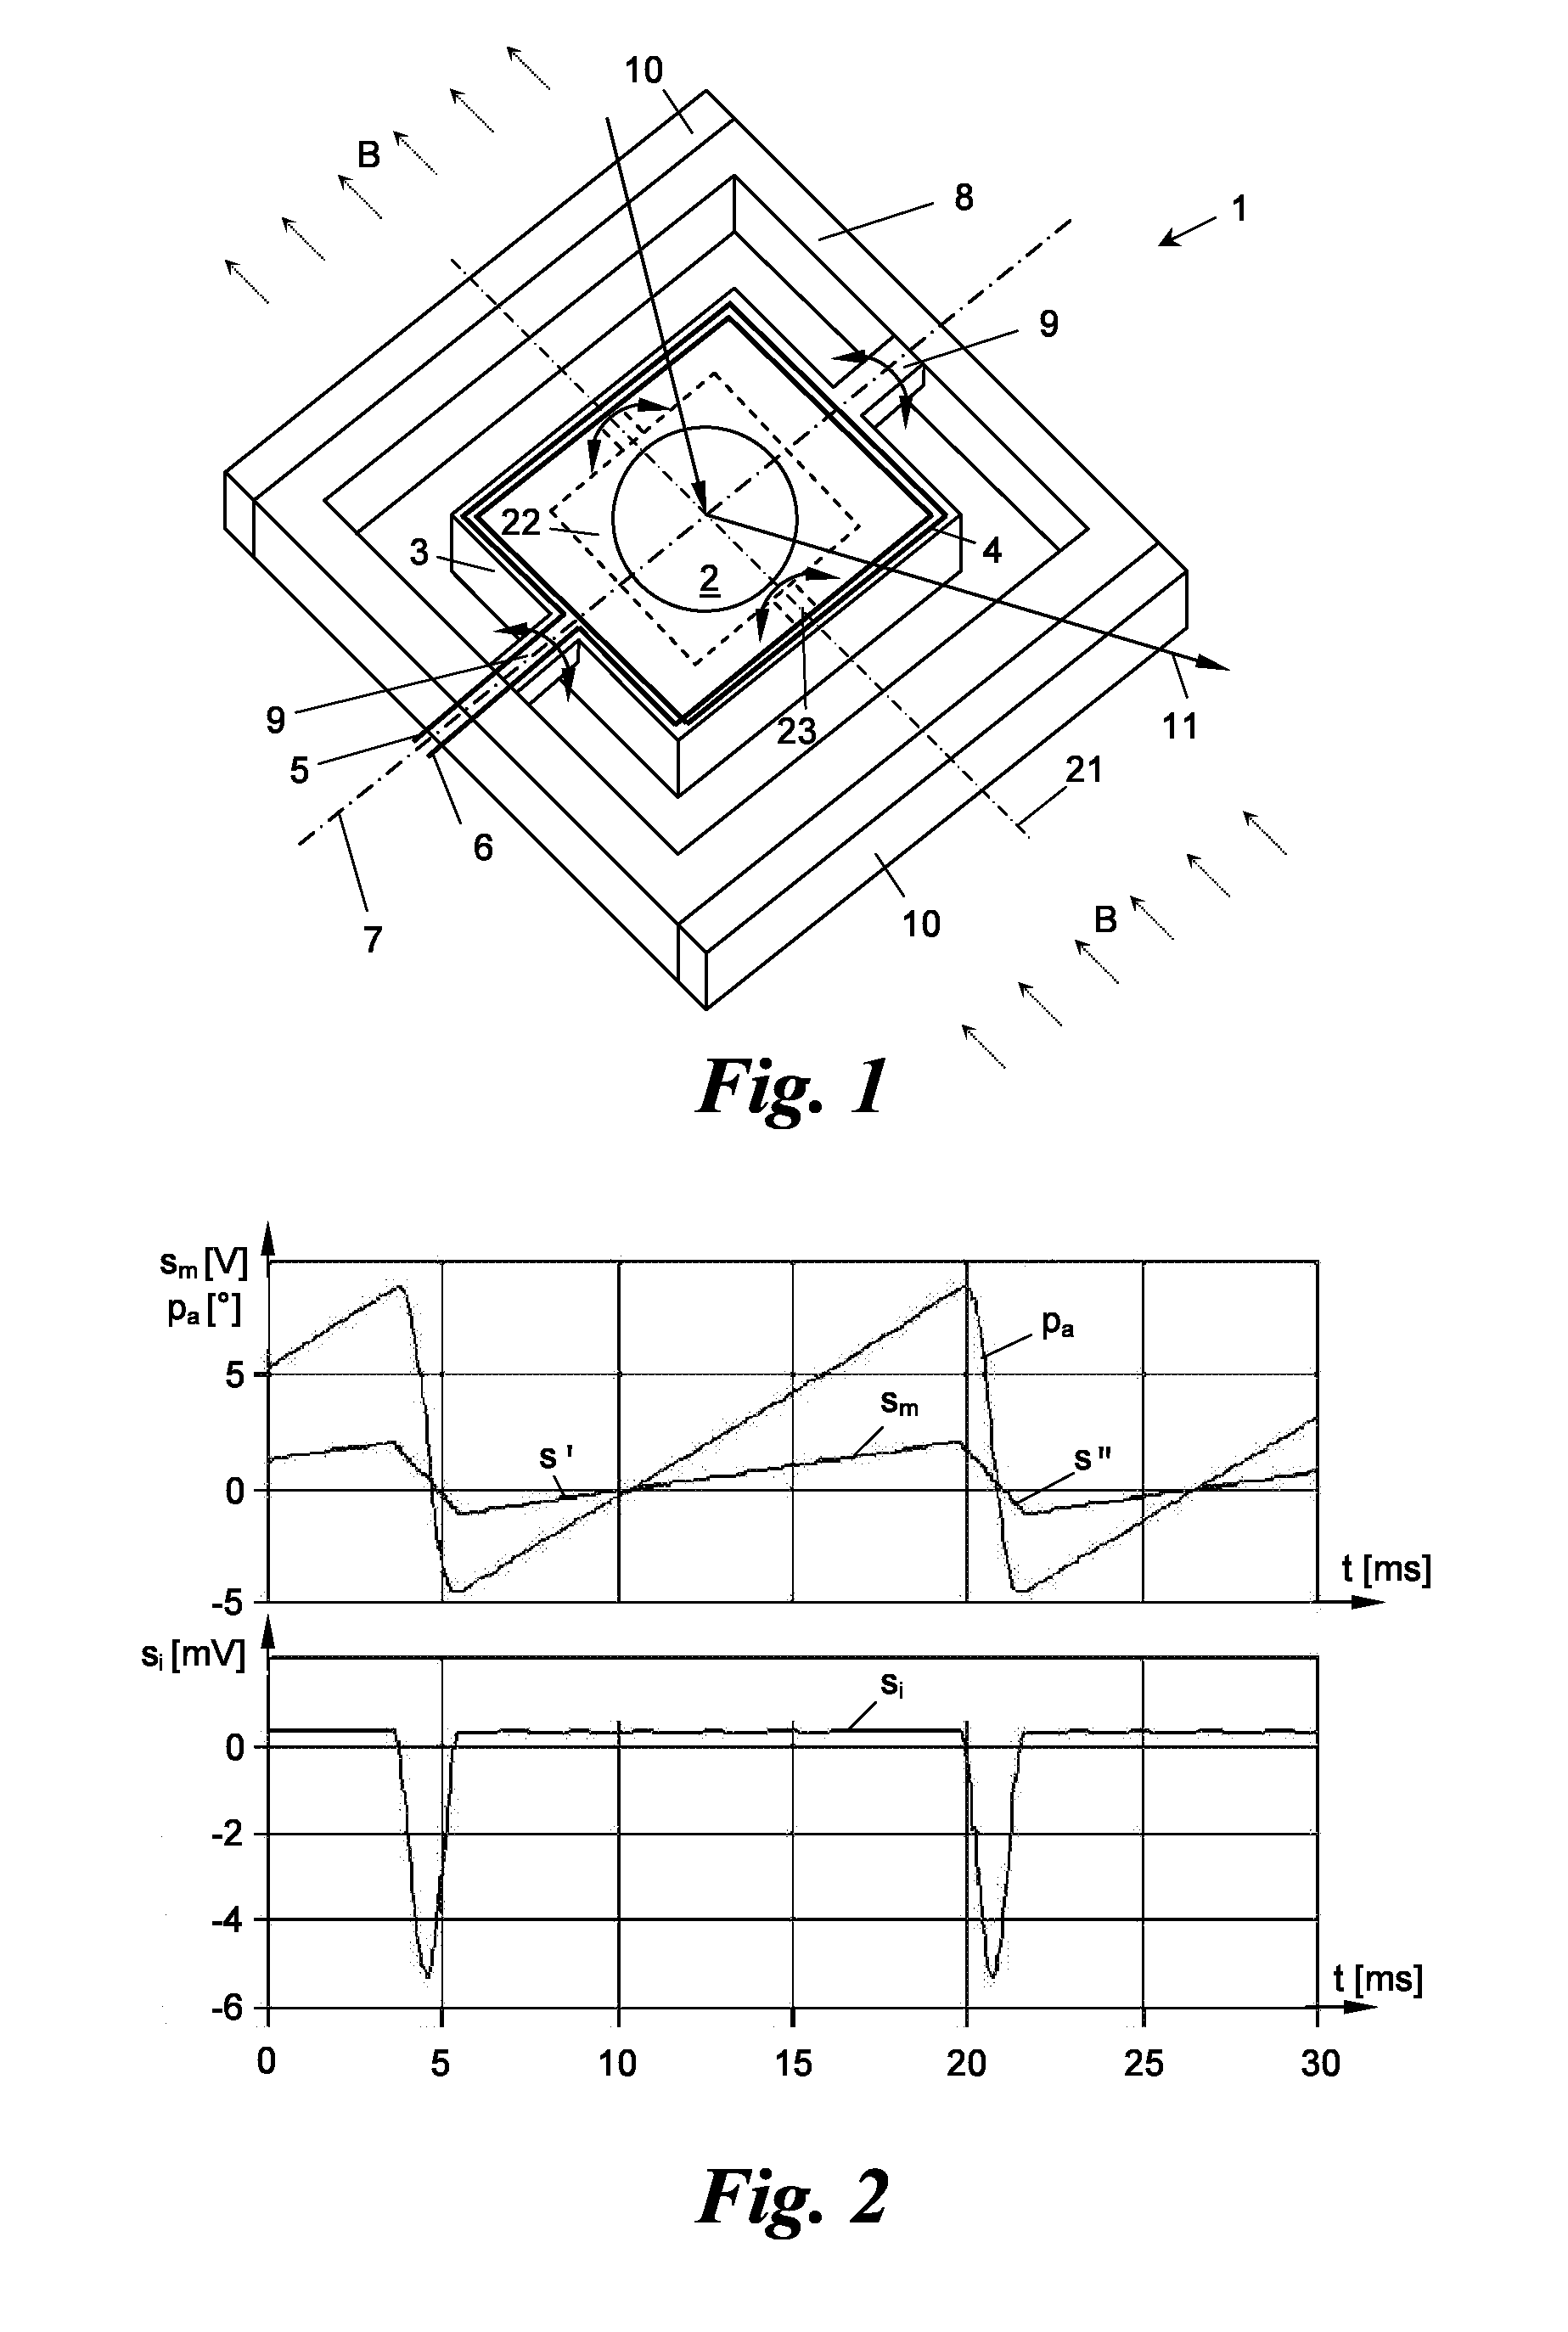 Apparatus and Method for Driving and Measuring a MEMS Mirror System